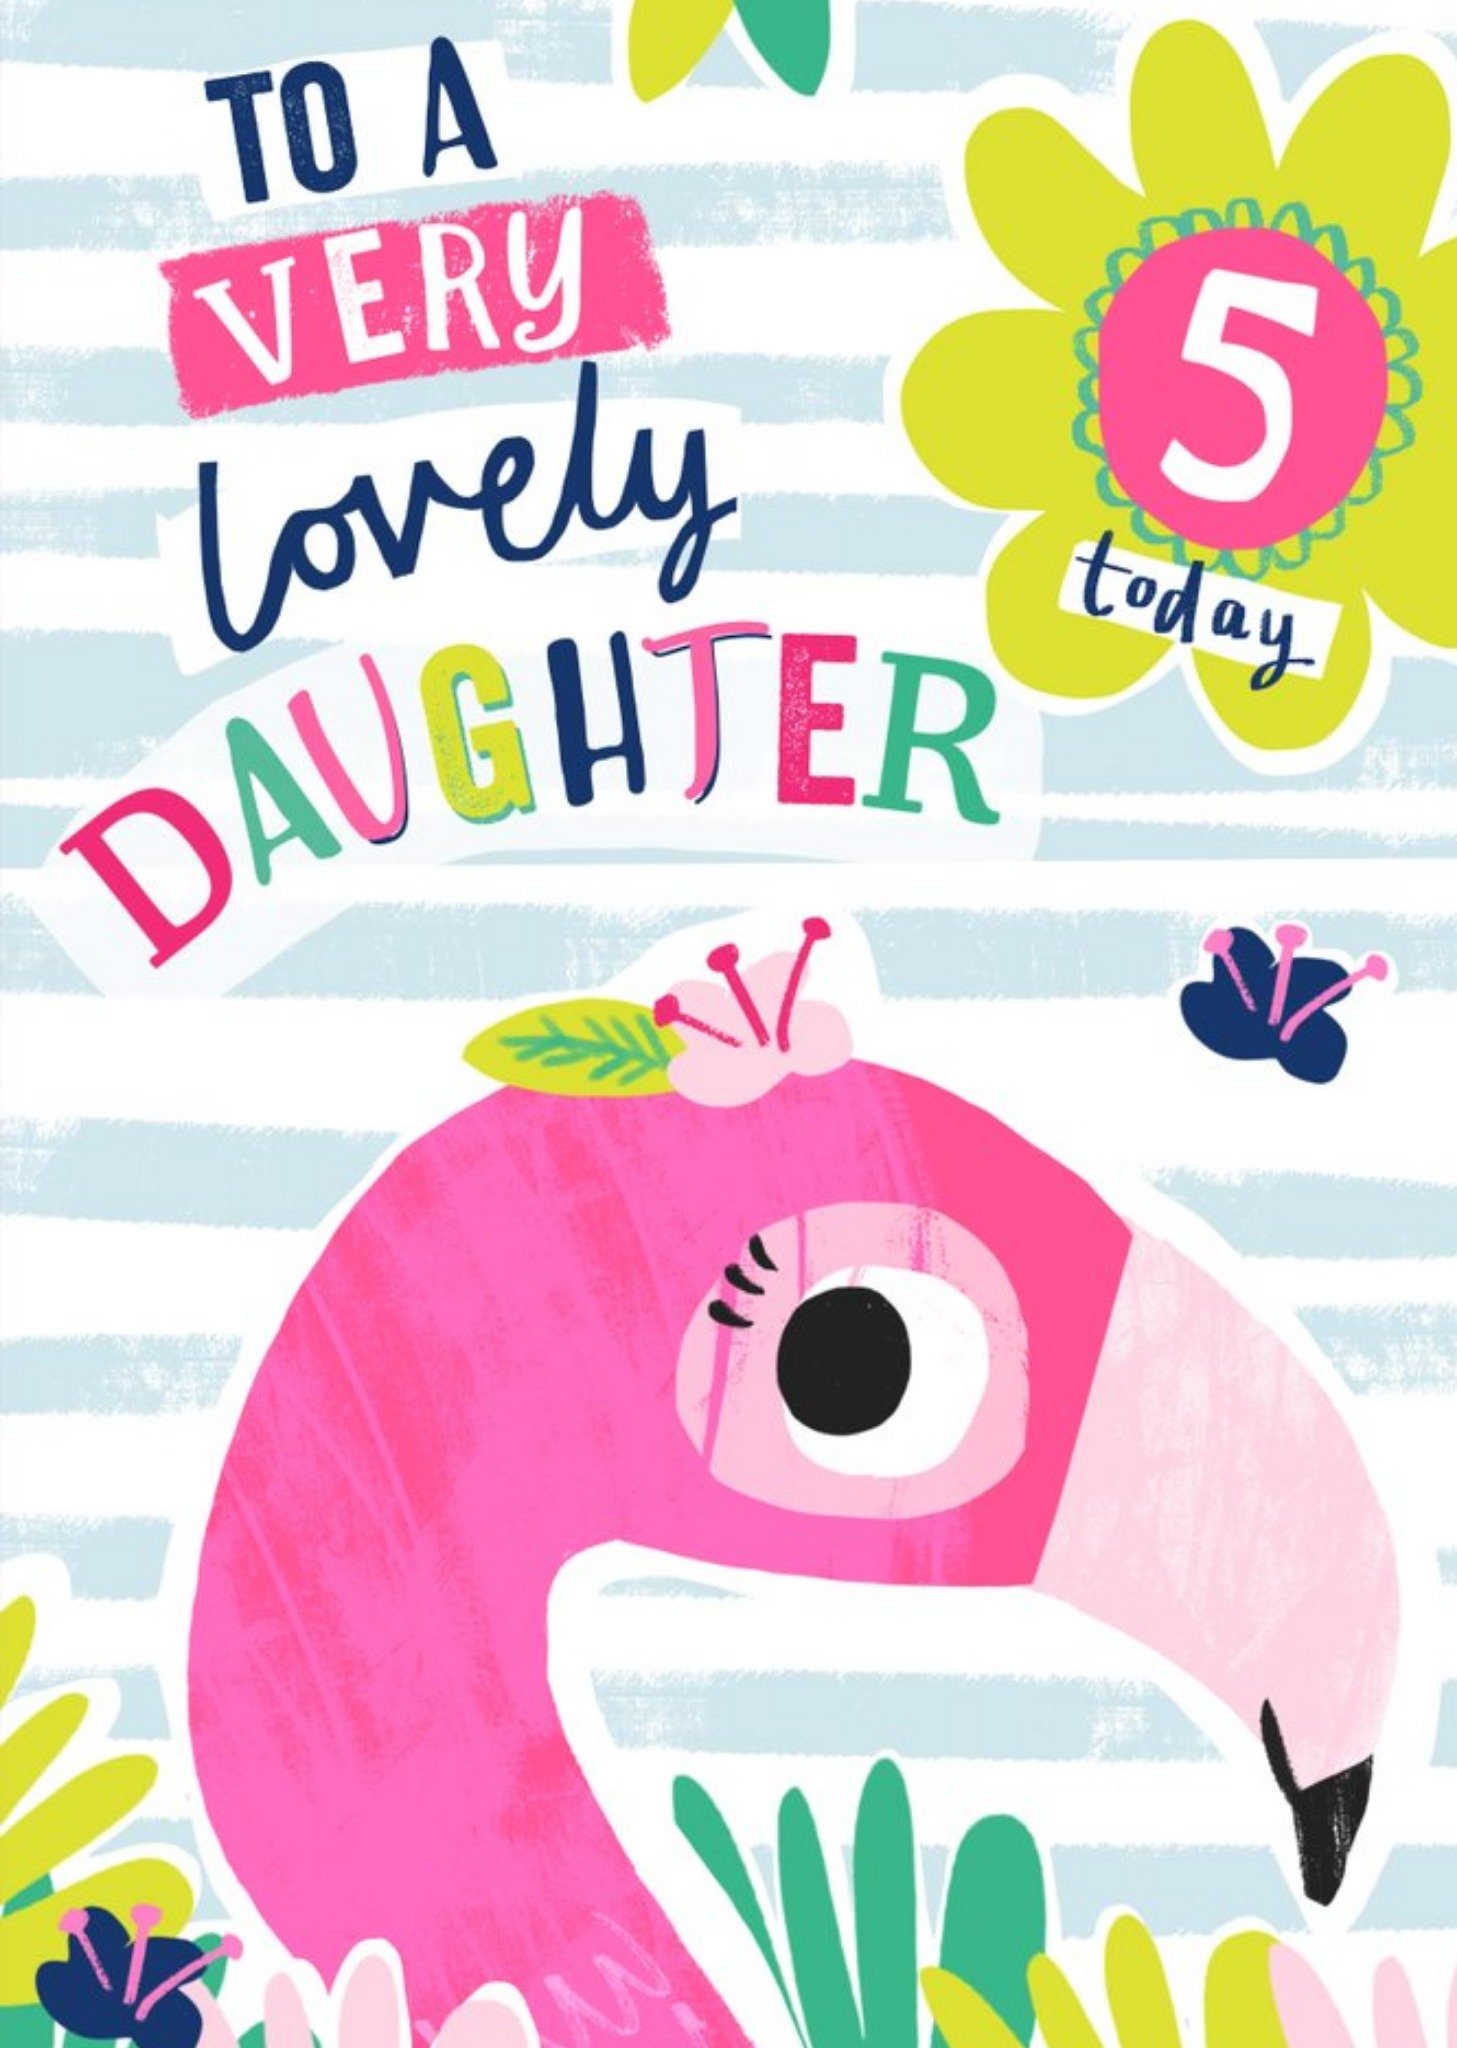 Moonpig Flamingo To A Very Lovely Daughter 5 Today Birthday Card Ecard